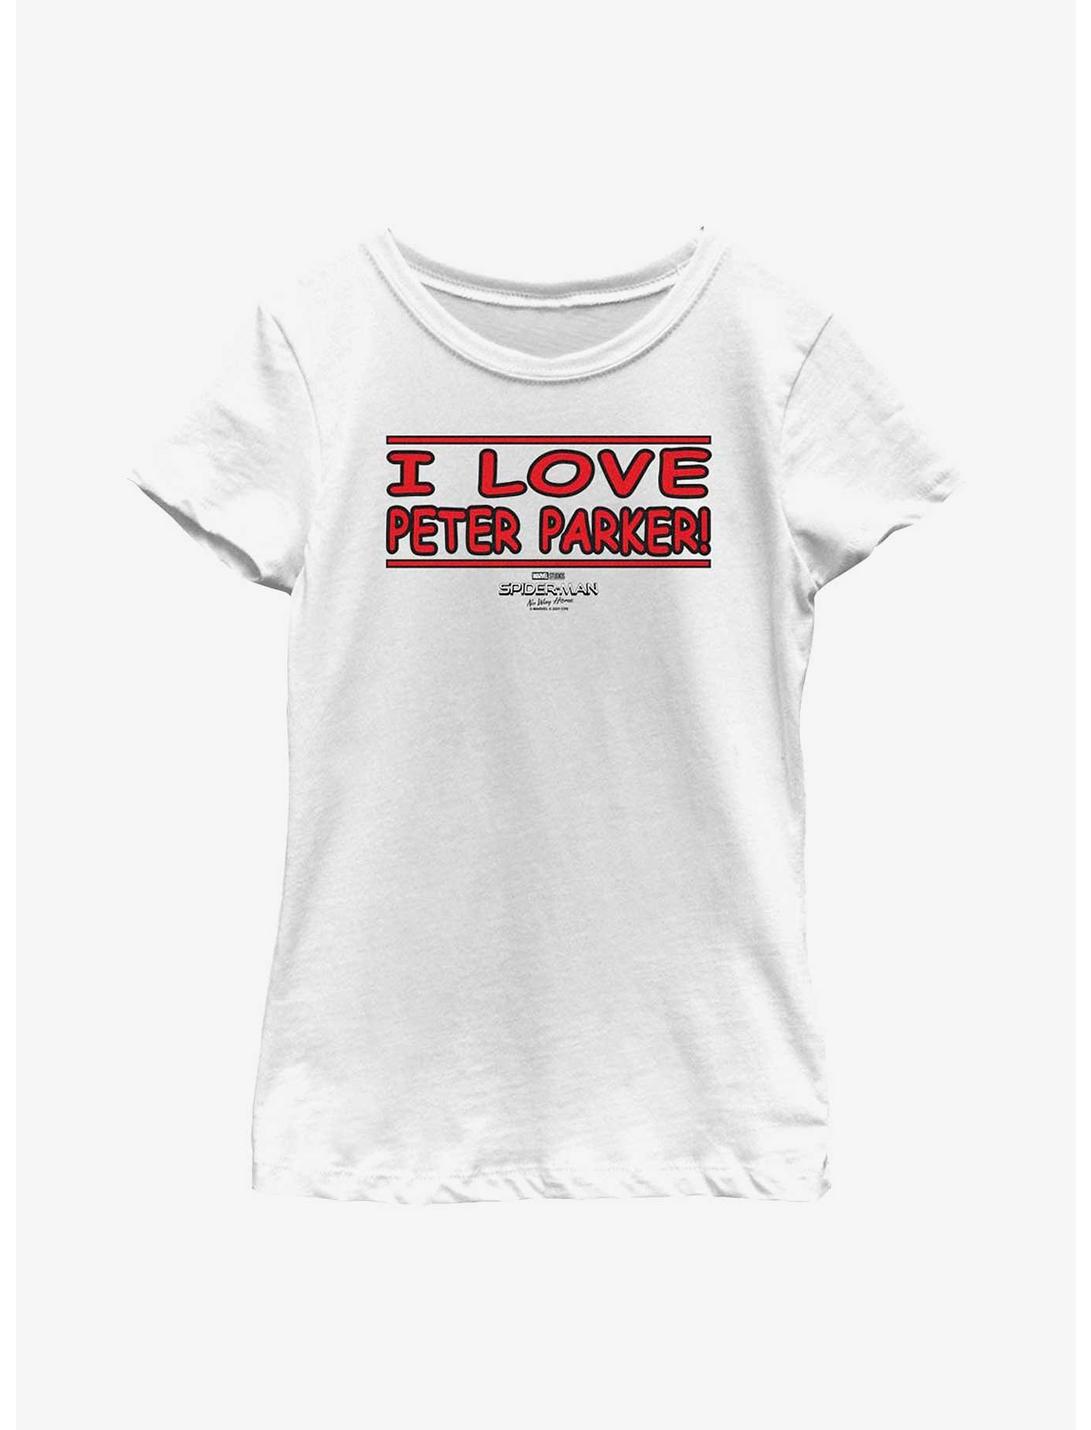 Marvel Spider-Man: No Way Home Love Peter Parker Youth Girls T-Shirt, WHITE, hi-res